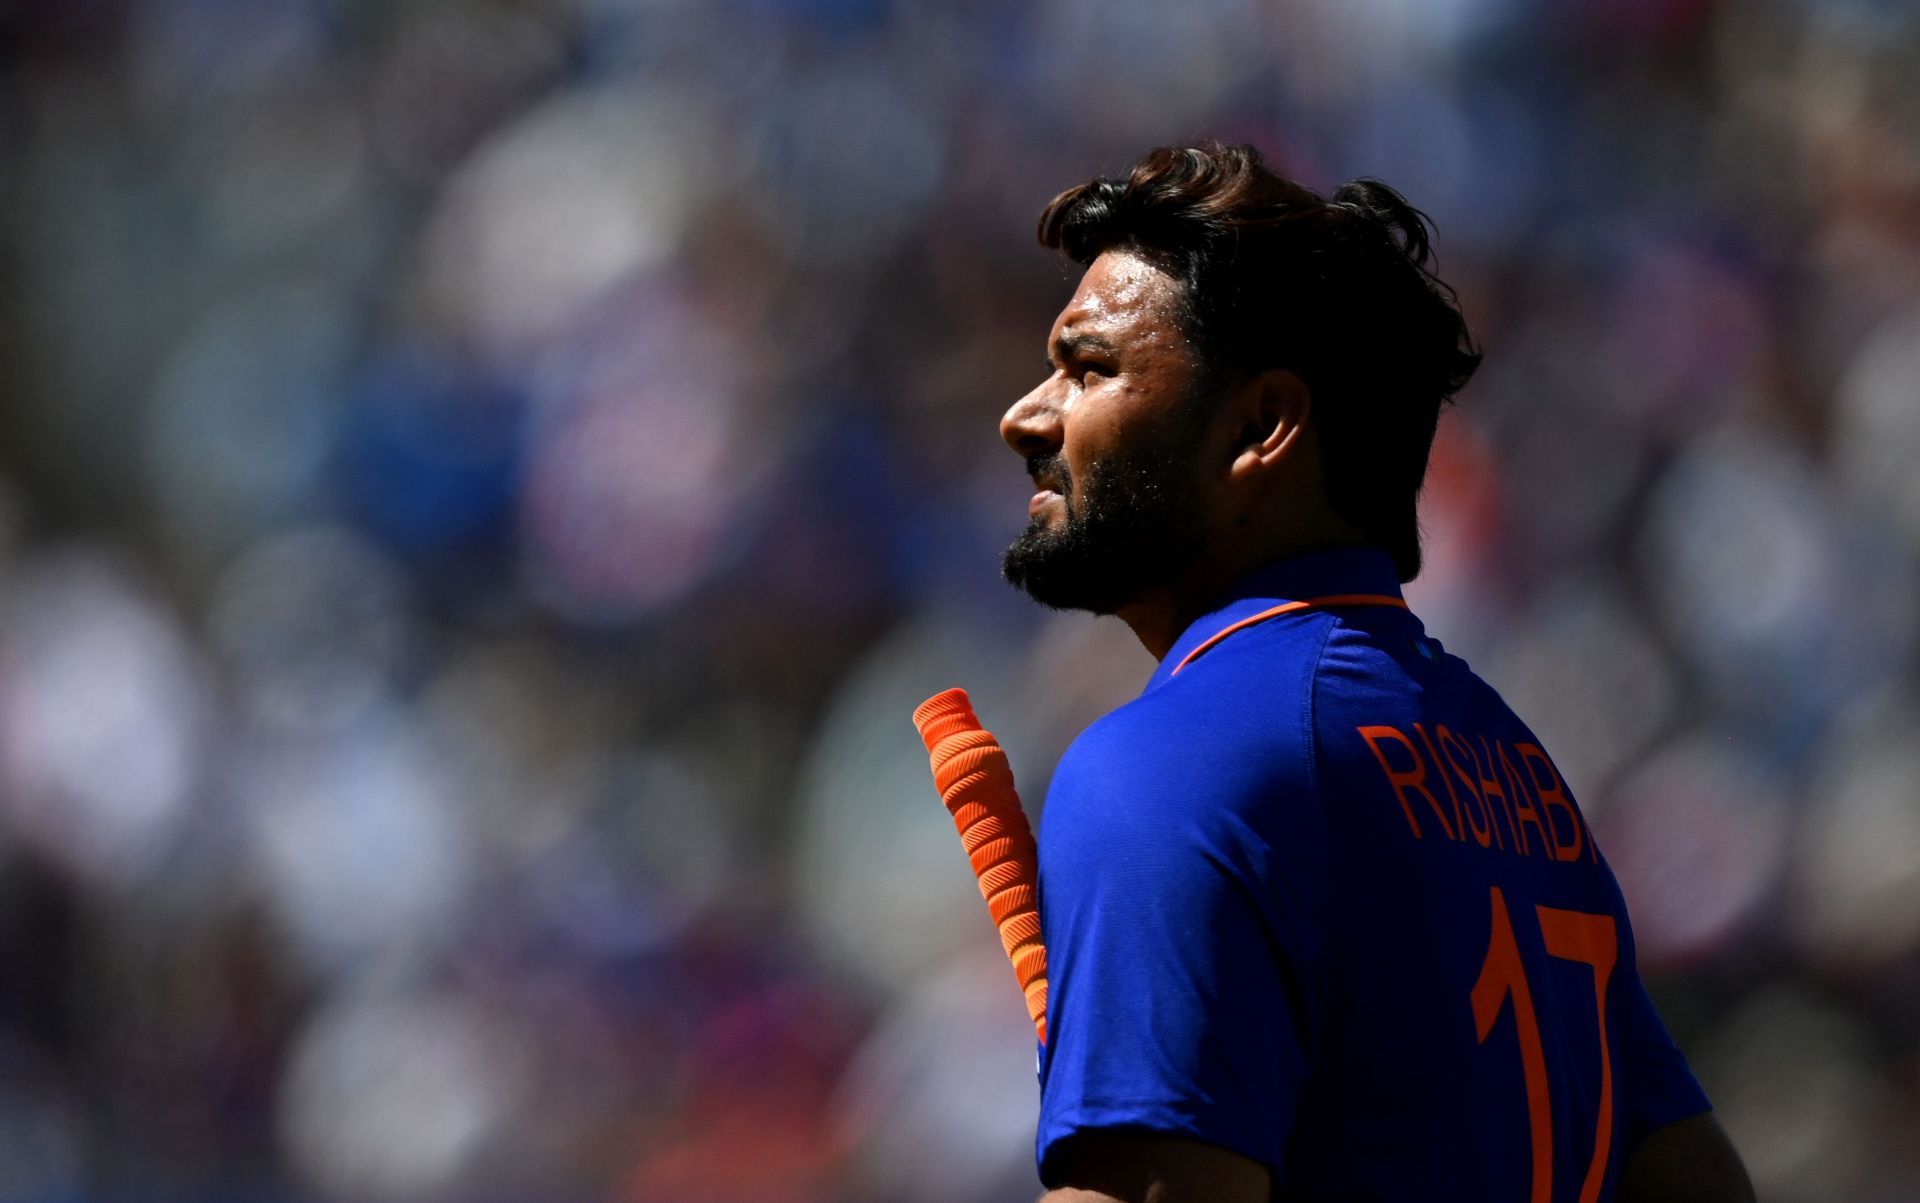 Rishabh Pant walks off after being dismissed during the 2nd T20I between England and India. Pic: Getty Images